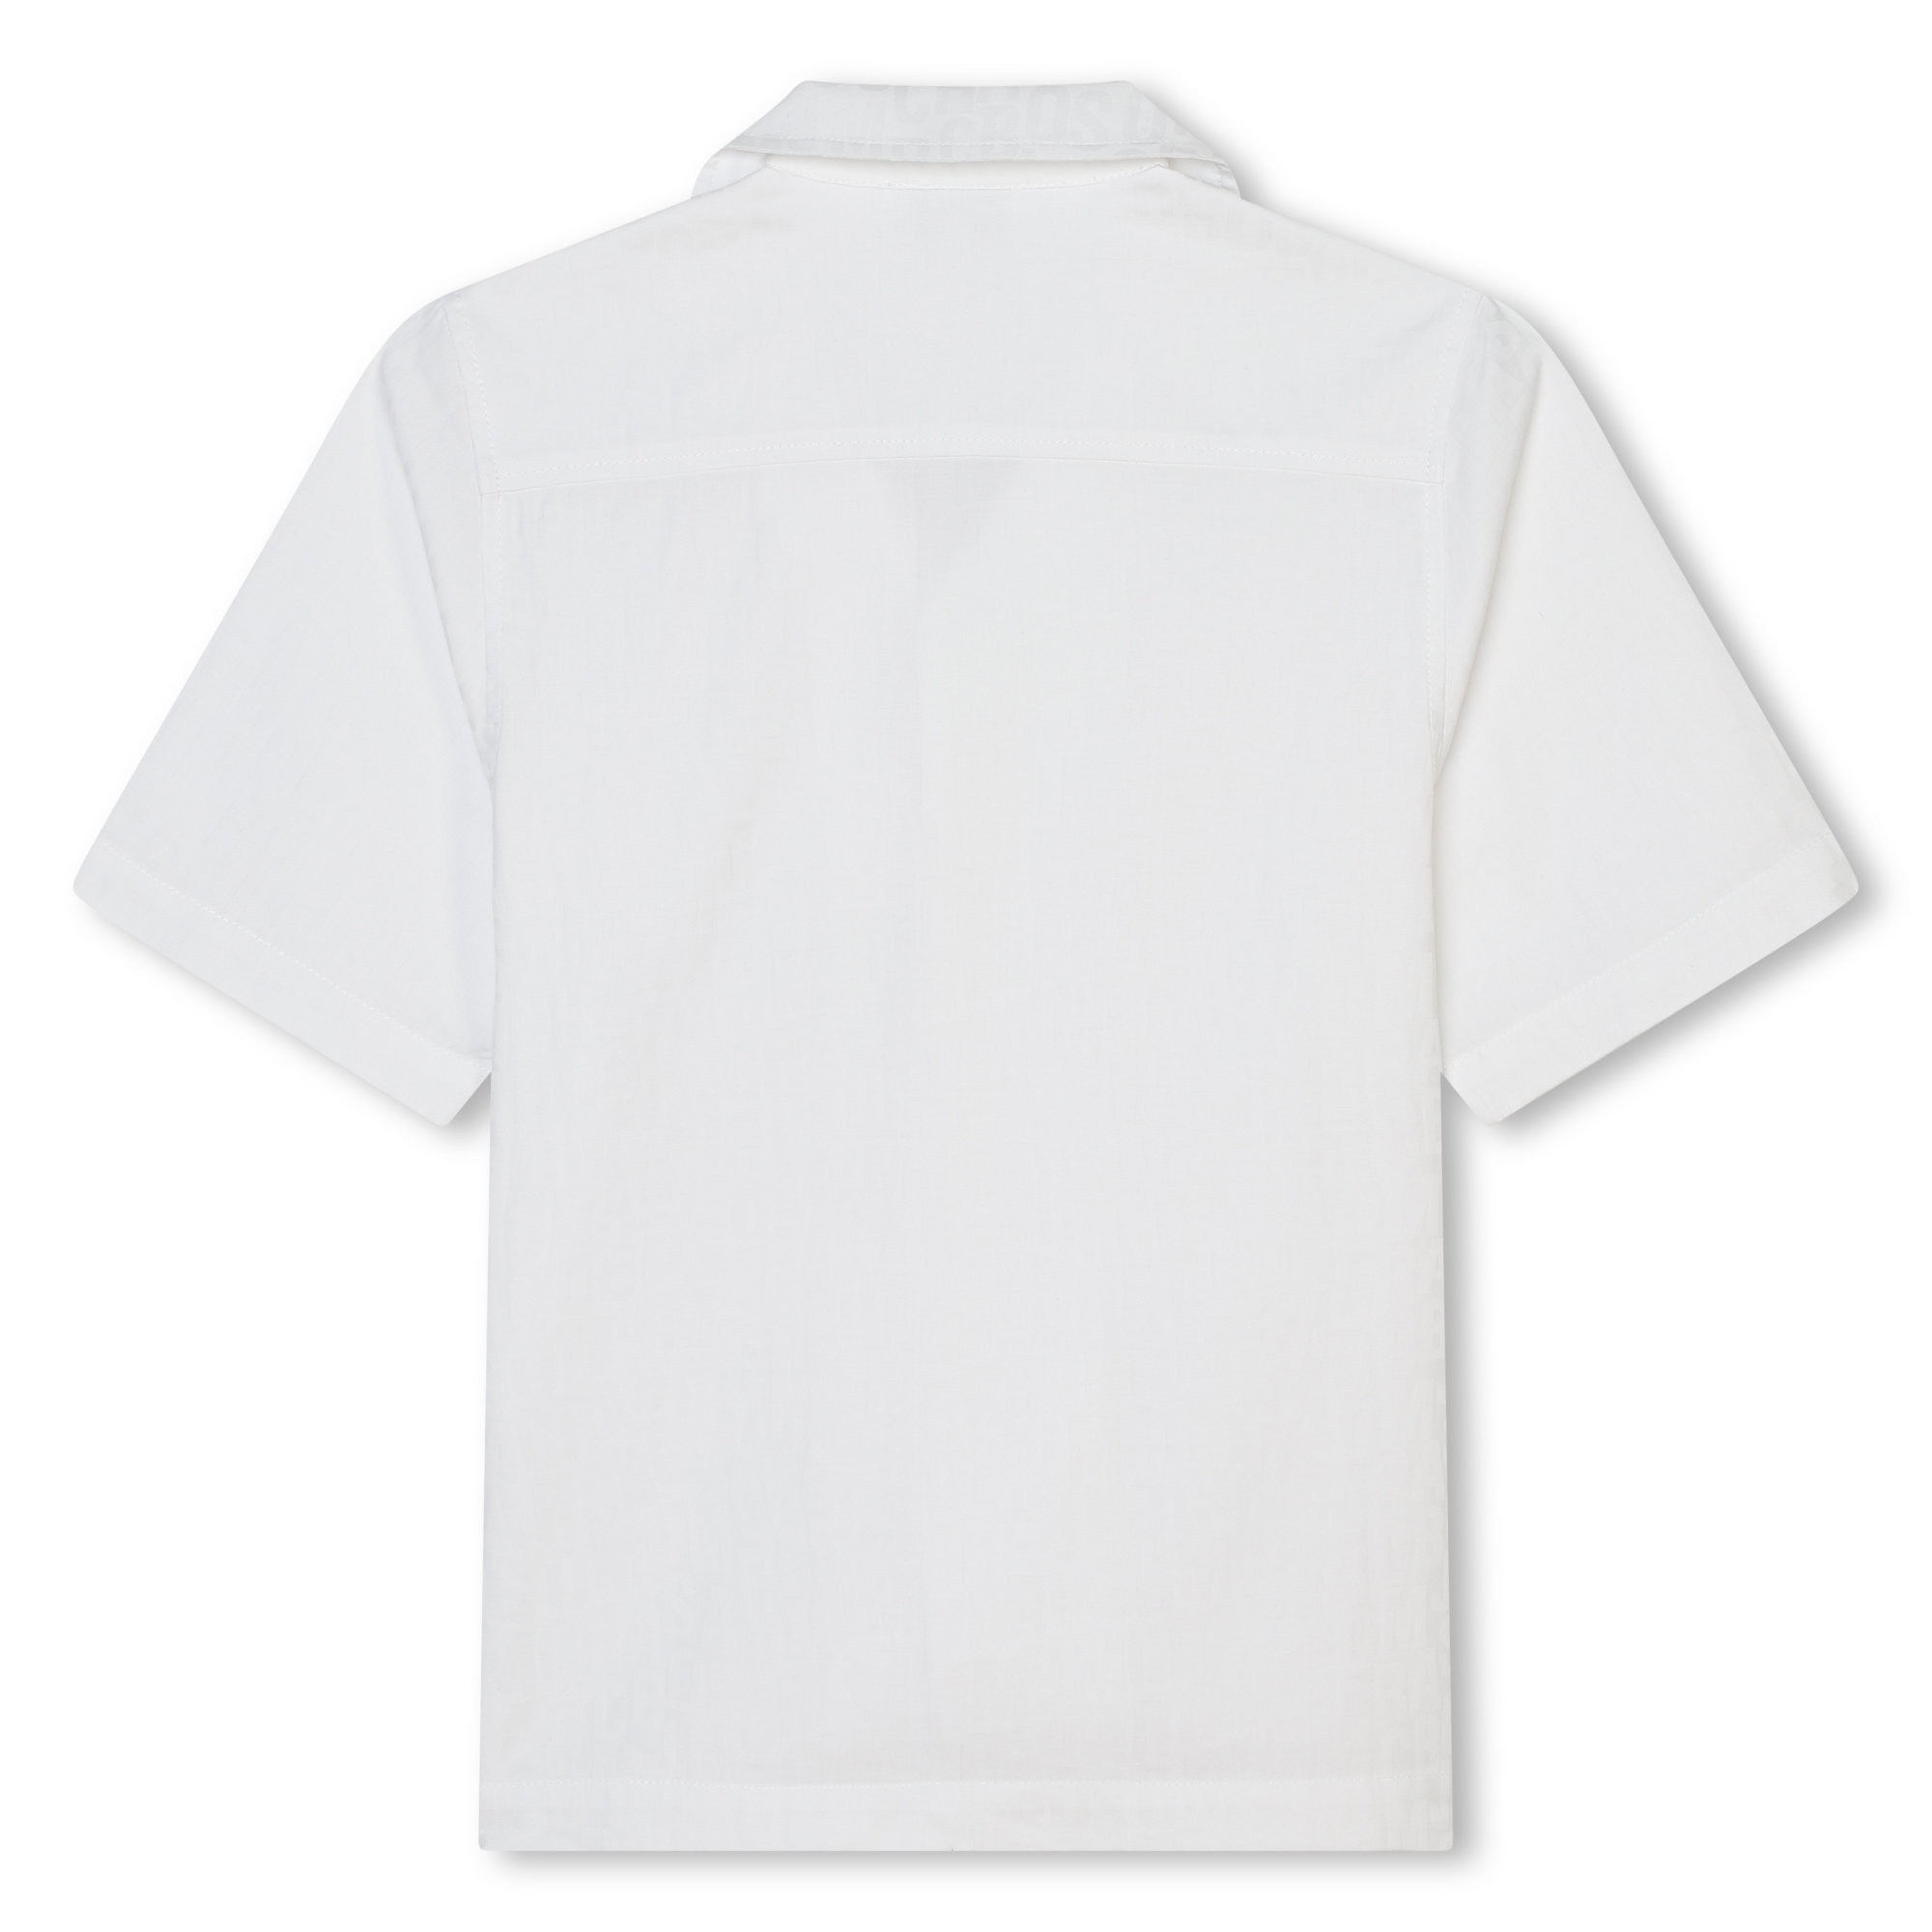 Short-sleeved shirt MARC JACOBS for BOY